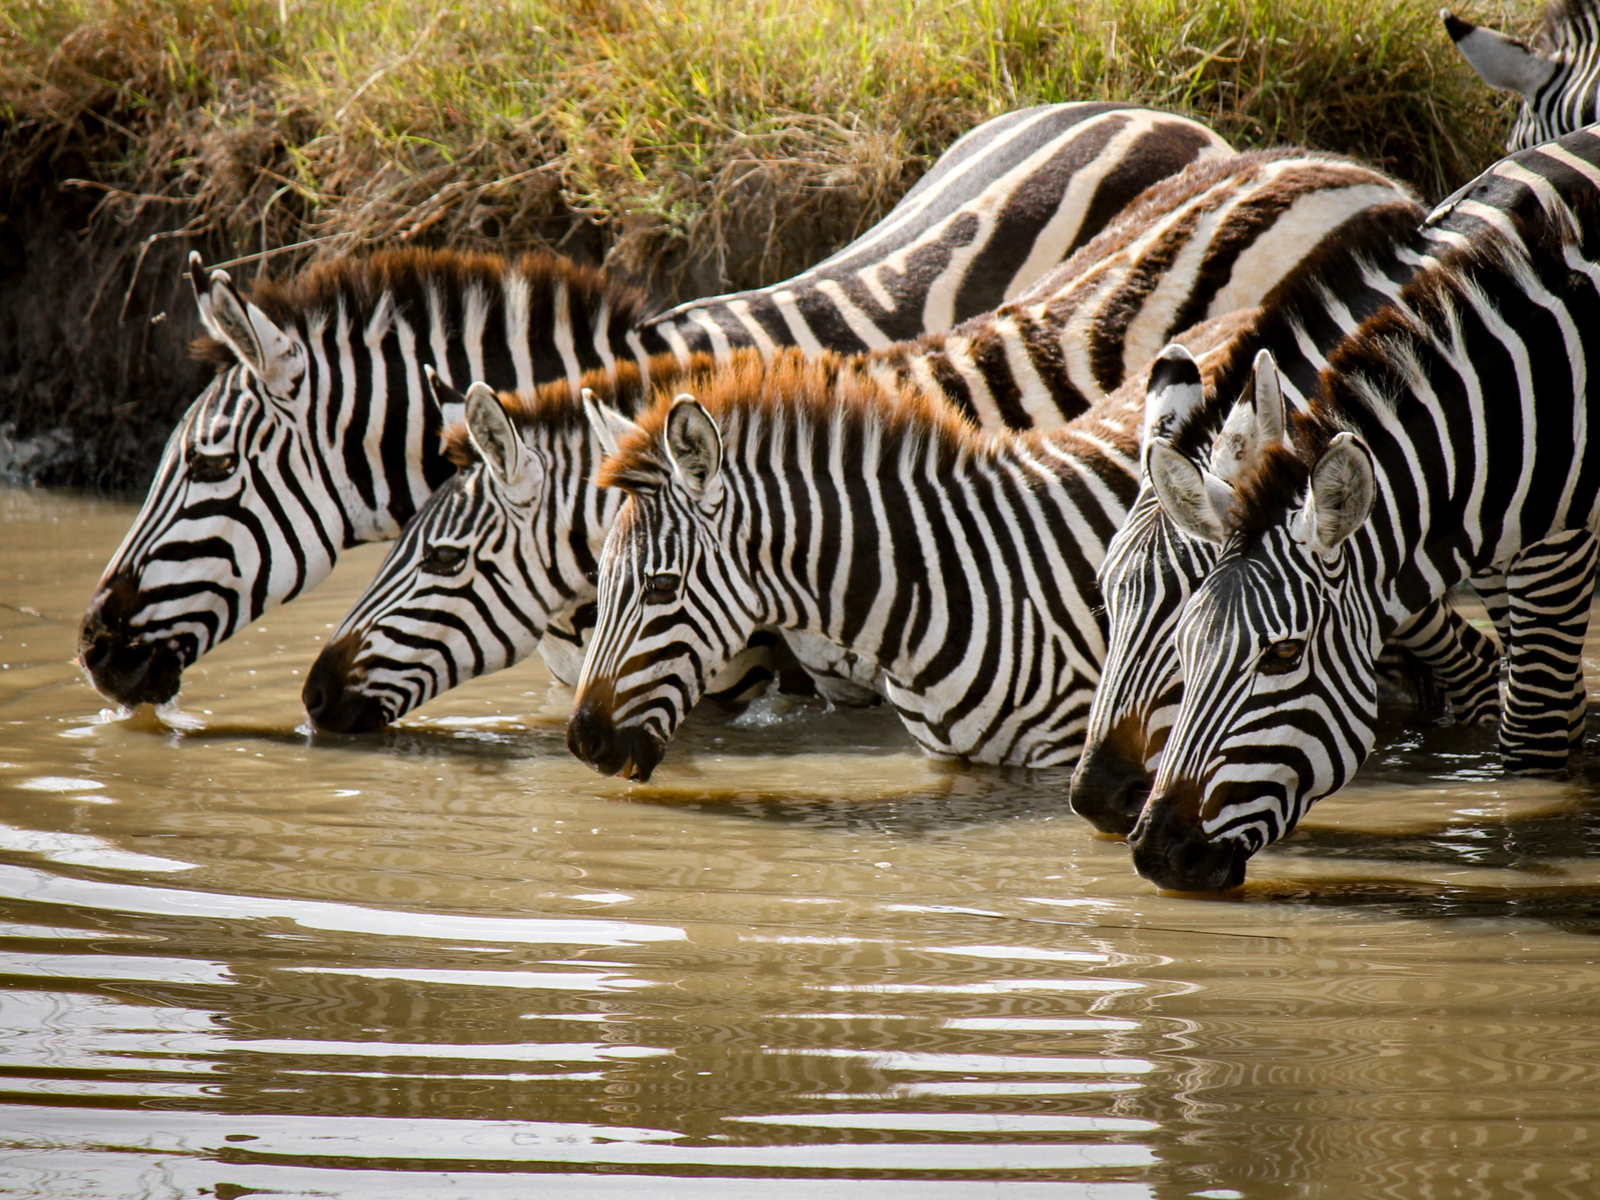 Zebras at the Queen Elizabeth National Park, one of the best safaris in Africa